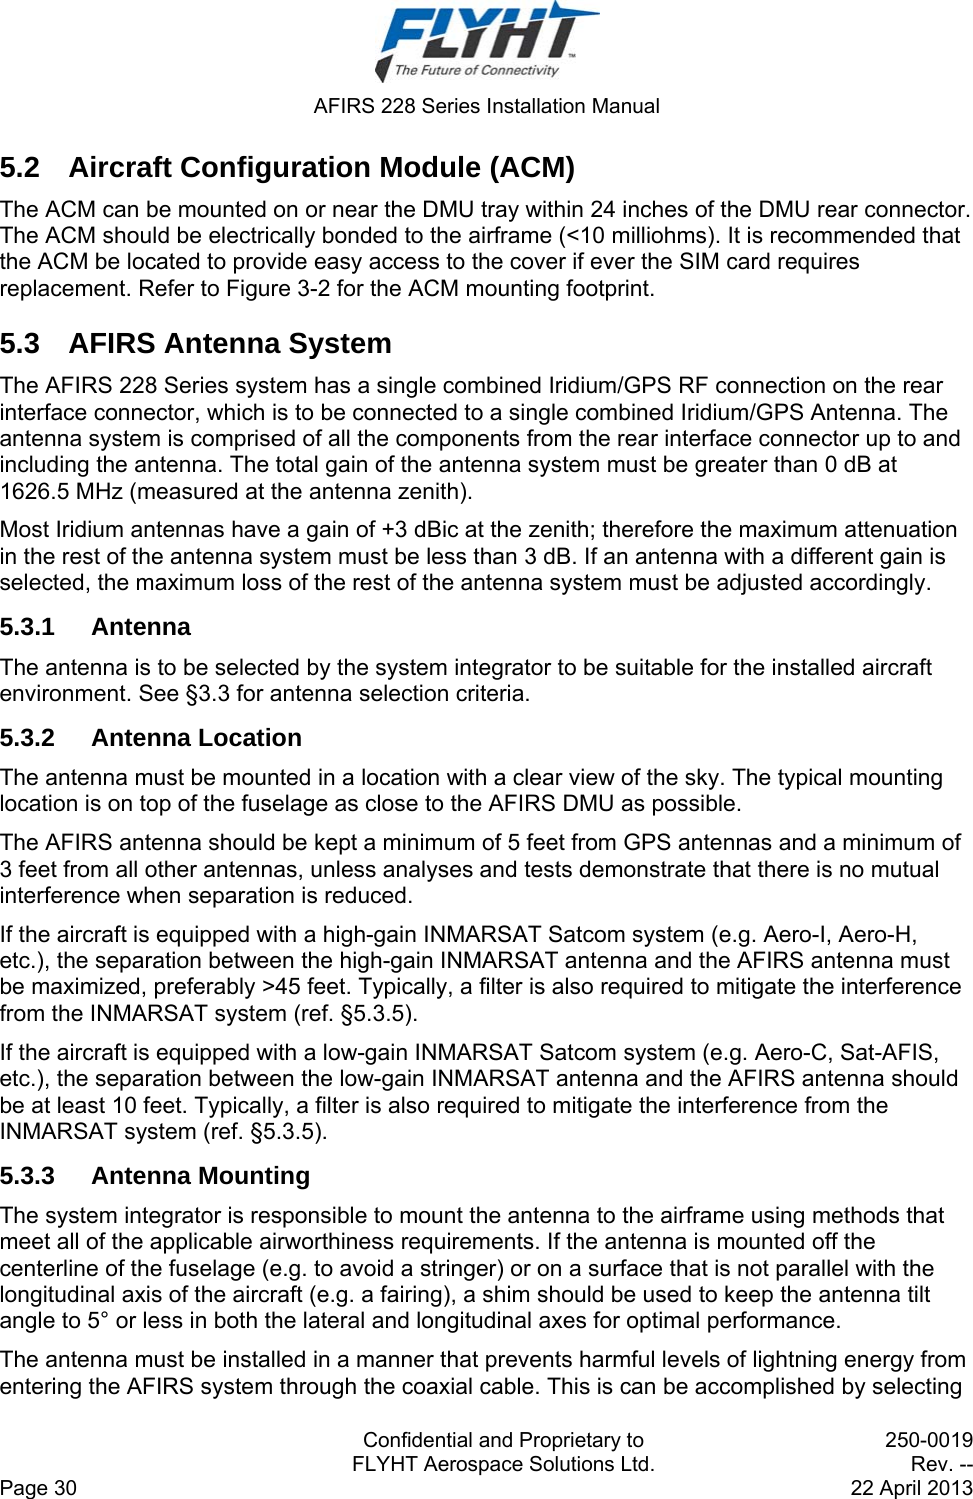  AFIRS 228 Series Installation Manual   Confidential and Proprietary to  250-0019   FLYHT Aerospace Solutions Ltd.  Rev. -- Page 30    22 April 2013 5.2  Aircraft Configuration Module (ACM) The ACM can be mounted on or near the DMU tray within 24 inches of the DMU rear connector. The ACM should be electrically bonded to the airframe (&lt;10 milliohms). It is recommended that the ACM be located to provide easy access to the cover if ever the SIM card requires replacement. Refer to Figure 3-2 for the ACM mounting footprint. 5.3  AFIRS Antenna System The AFIRS 228 Series system has a single combined Iridium/GPS RF connection on the rear interface connector, which is to be connected to a single combined Iridium/GPS Antenna. The antenna system is comprised of all the components from the rear interface connector up to and including the antenna. The total gain of the antenna system must be greater than 0 dB at 1626.5 MHz (measured at the antenna zenith). Most Iridium antennas have a gain of +3 dBic at the zenith; therefore the maximum attenuation in the rest of the antenna system must be less than 3 dB. If an antenna with a different gain is selected, the maximum loss of the rest of the antenna system must be adjusted accordingly. 5.3.1 Antenna The antenna is to be selected by the system integrator to be suitable for the installed aircraft environment. See §3.3 for antenna selection criteria. 5.3.2 Antenna Location The antenna must be mounted in a location with a clear view of the sky. The typical mounting location is on top of the fuselage as close to the AFIRS DMU as possible. The AFIRS antenna should be kept a minimum of 5 feet from GPS antennas and a minimum of 3 feet from all other antennas, unless analyses and tests demonstrate that there is no mutual interference when separation is reduced. If the aircraft is equipped with a high-gain INMARSAT Satcom system (e.g. Aero-I, Aero-H, etc.), the separation between the high-gain INMARSAT antenna and the AFIRS antenna must be maximized, preferably &gt;45 feet. Typically, a filter is also required to mitigate the interference from the INMARSAT system (ref. §5.3.5). If the aircraft is equipped with a low-gain INMARSAT Satcom system (e.g. Aero-C, Sat-AFIS, etc.), the separation between the low-gain INMARSAT antenna and the AFIRS antenna should be at least 10 feet. Typically, a filter is also required to mitigate the interference from the INMARSAT system (ref. §5.3.5). 5.3.3 Antenna Mounting The system integrator is responsible to mount the antenna to the airframe using methods that meet all of the applicable airworthiness requirements. If the antenna is mounted off the centerline of the fuselage (e.g. to avoid a stringer) or on a surface that is not parallel with the longitudinal axis of the aircraft (e.g. a fairing), a shim should be used to keep the antenna tilt angle to 5° or less in both the lateral and longitudinal axes for optimal performance. The antenna must be installed in a manner that prevents harmful levels of lightning energy from entering the AFIRS system through the coaxial cable. This is can be accomplished by selecting 